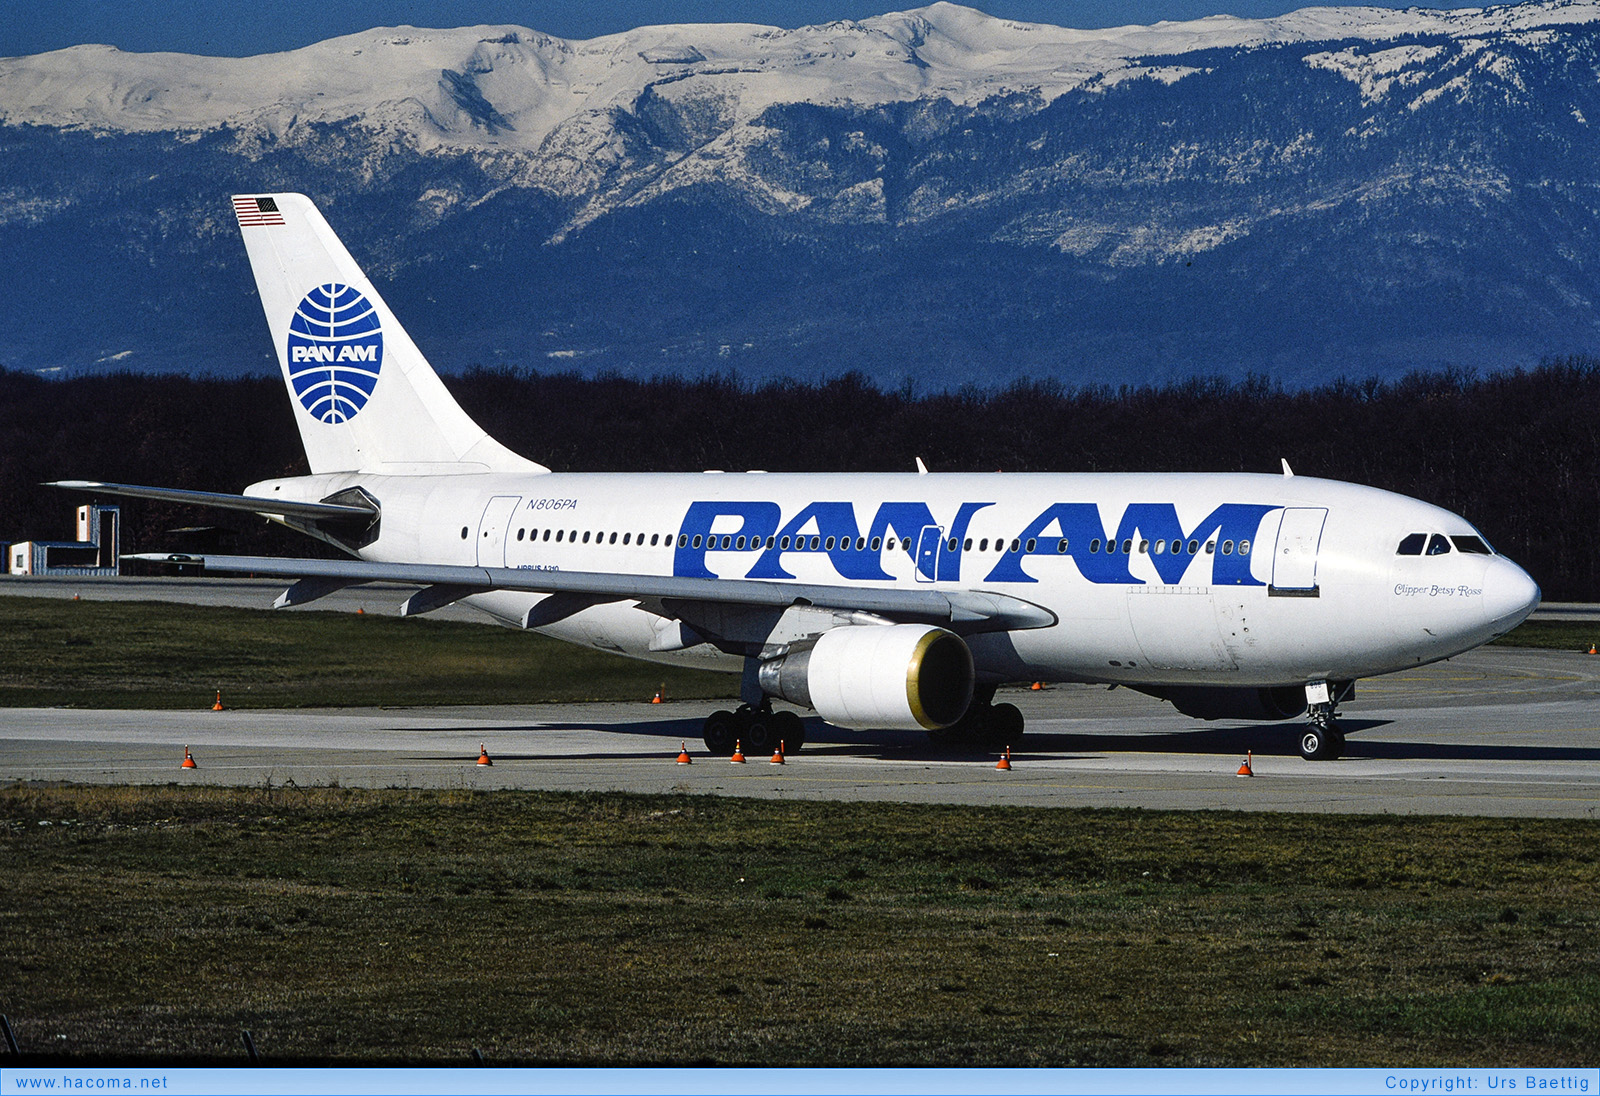 Photo of N806PA - Pan Am Clipper Jesse Owens / Betsy Ross - Geneva Airport - 1990